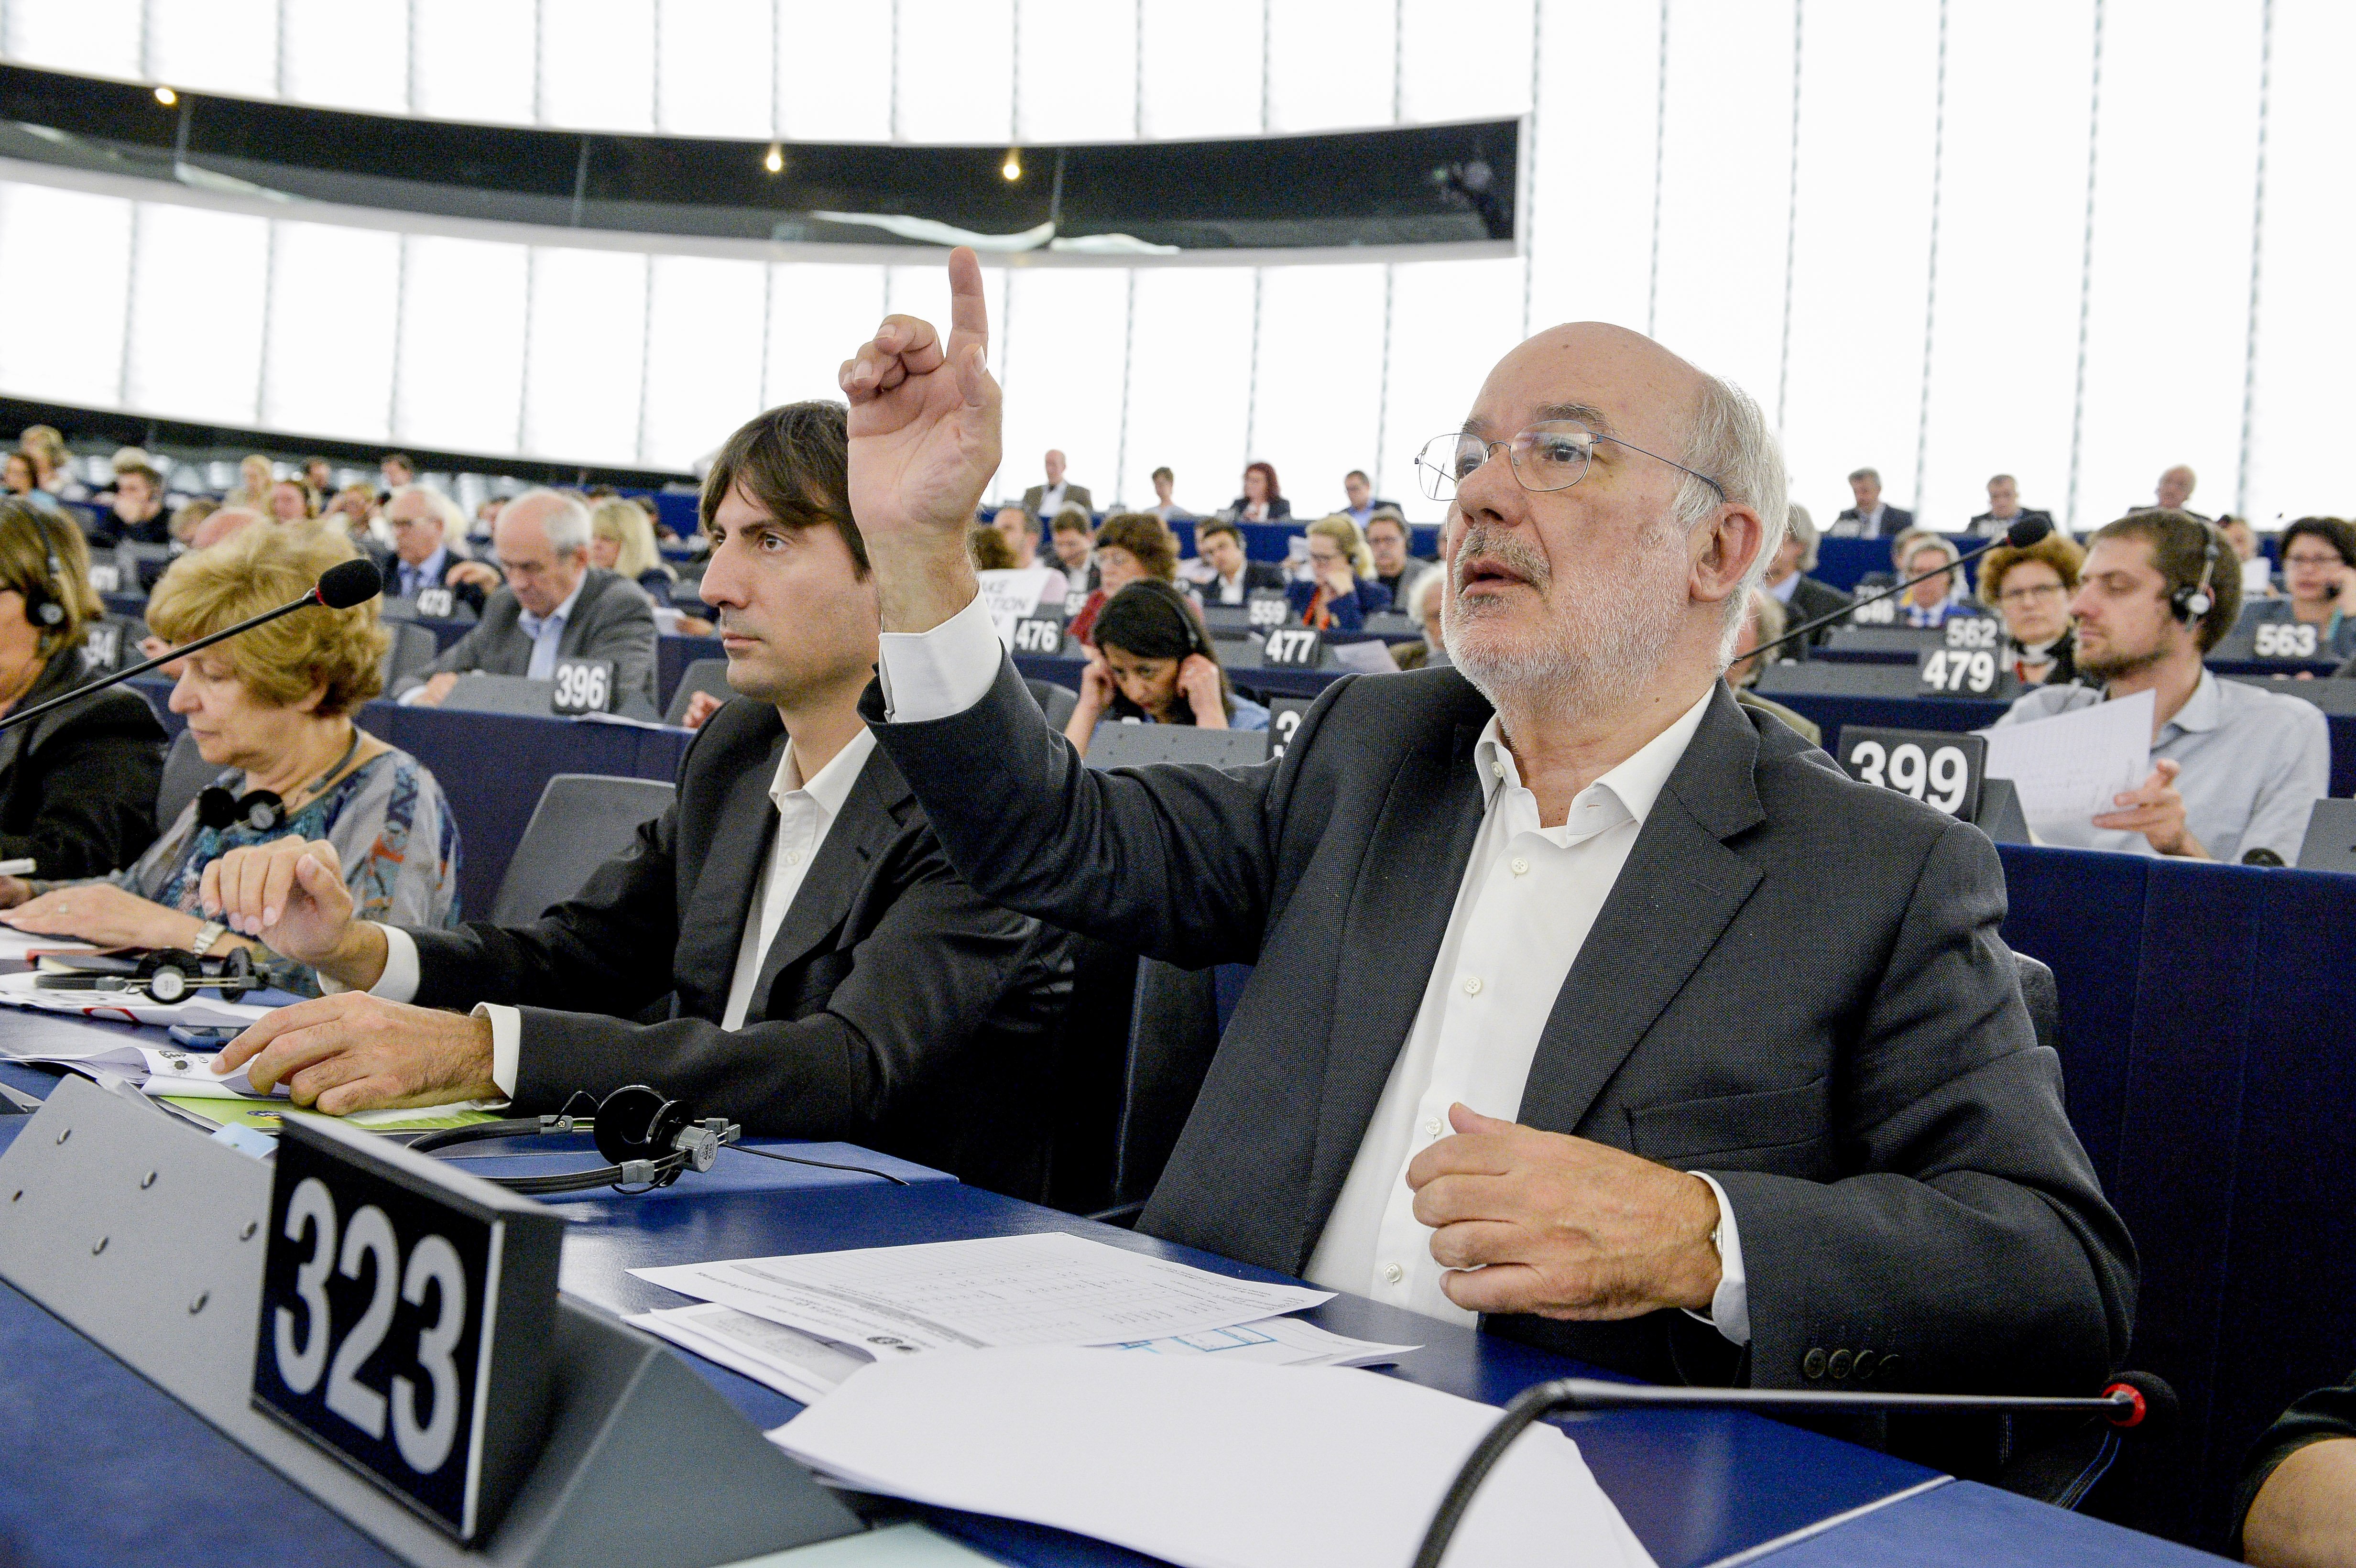 MEP Terricabras proposes "hunger strike" if referendum is prevented